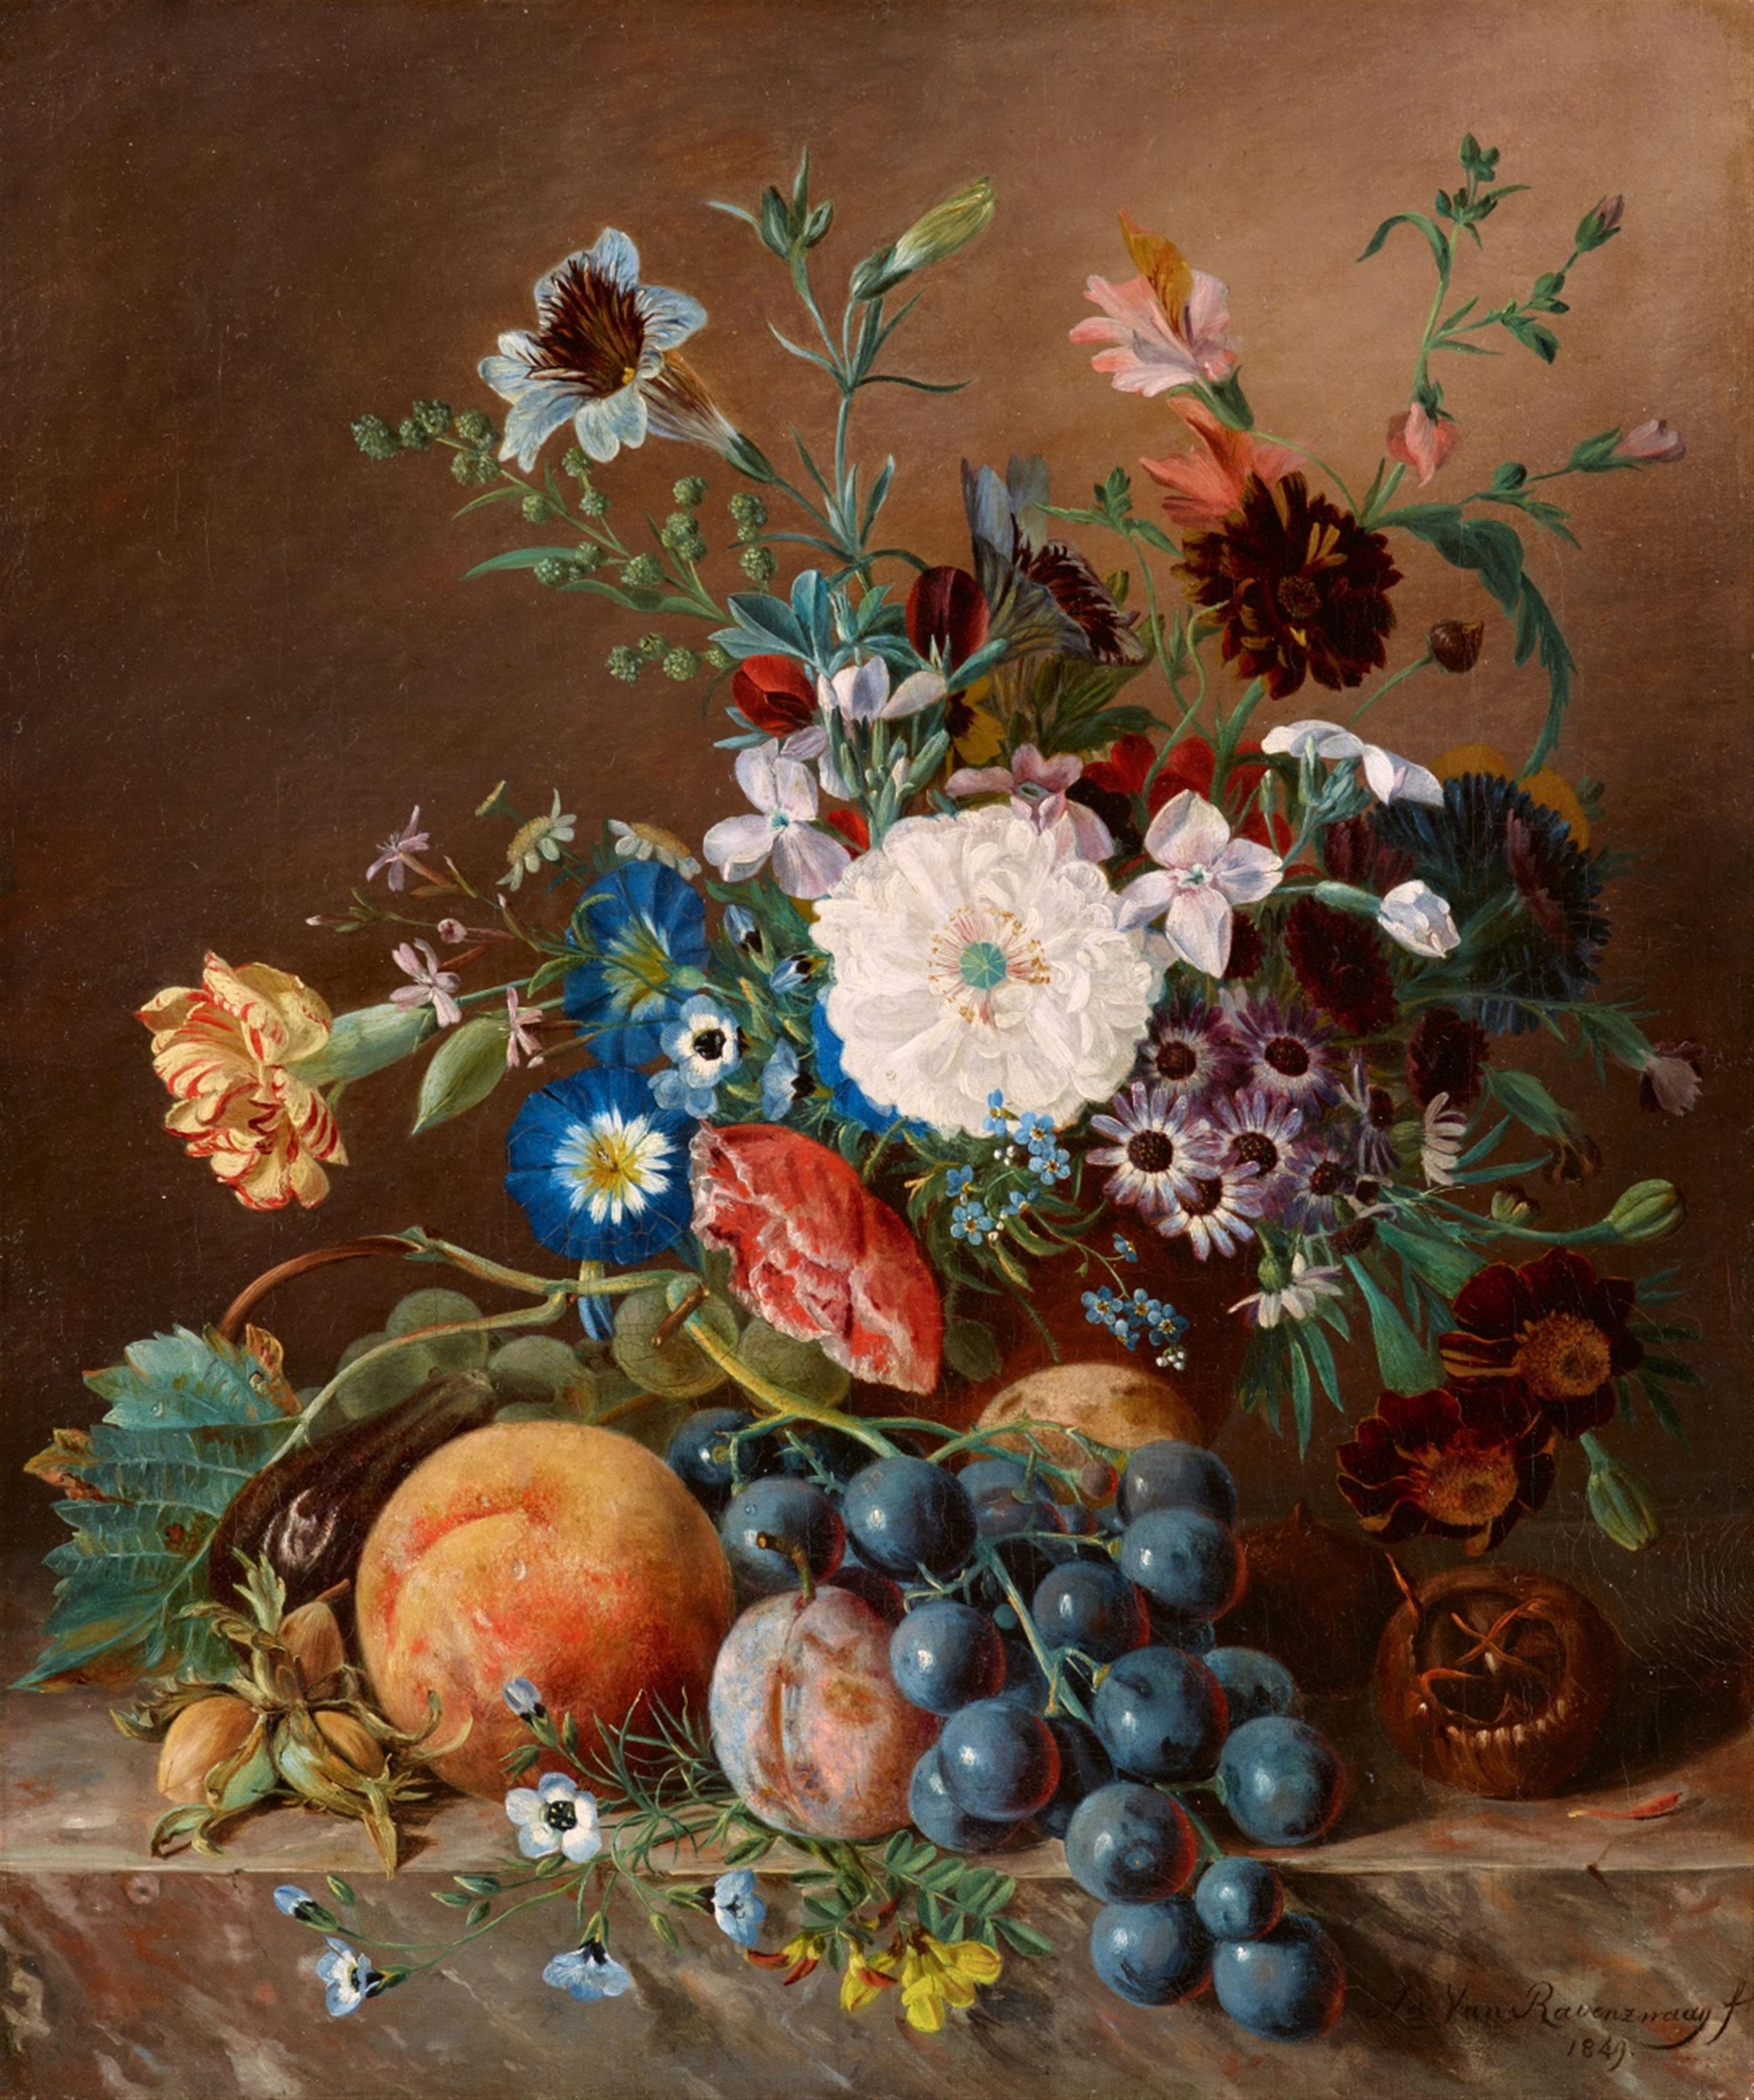 Adriana van Ravenswaay - Still Life with Flowers and Fruits - image-1